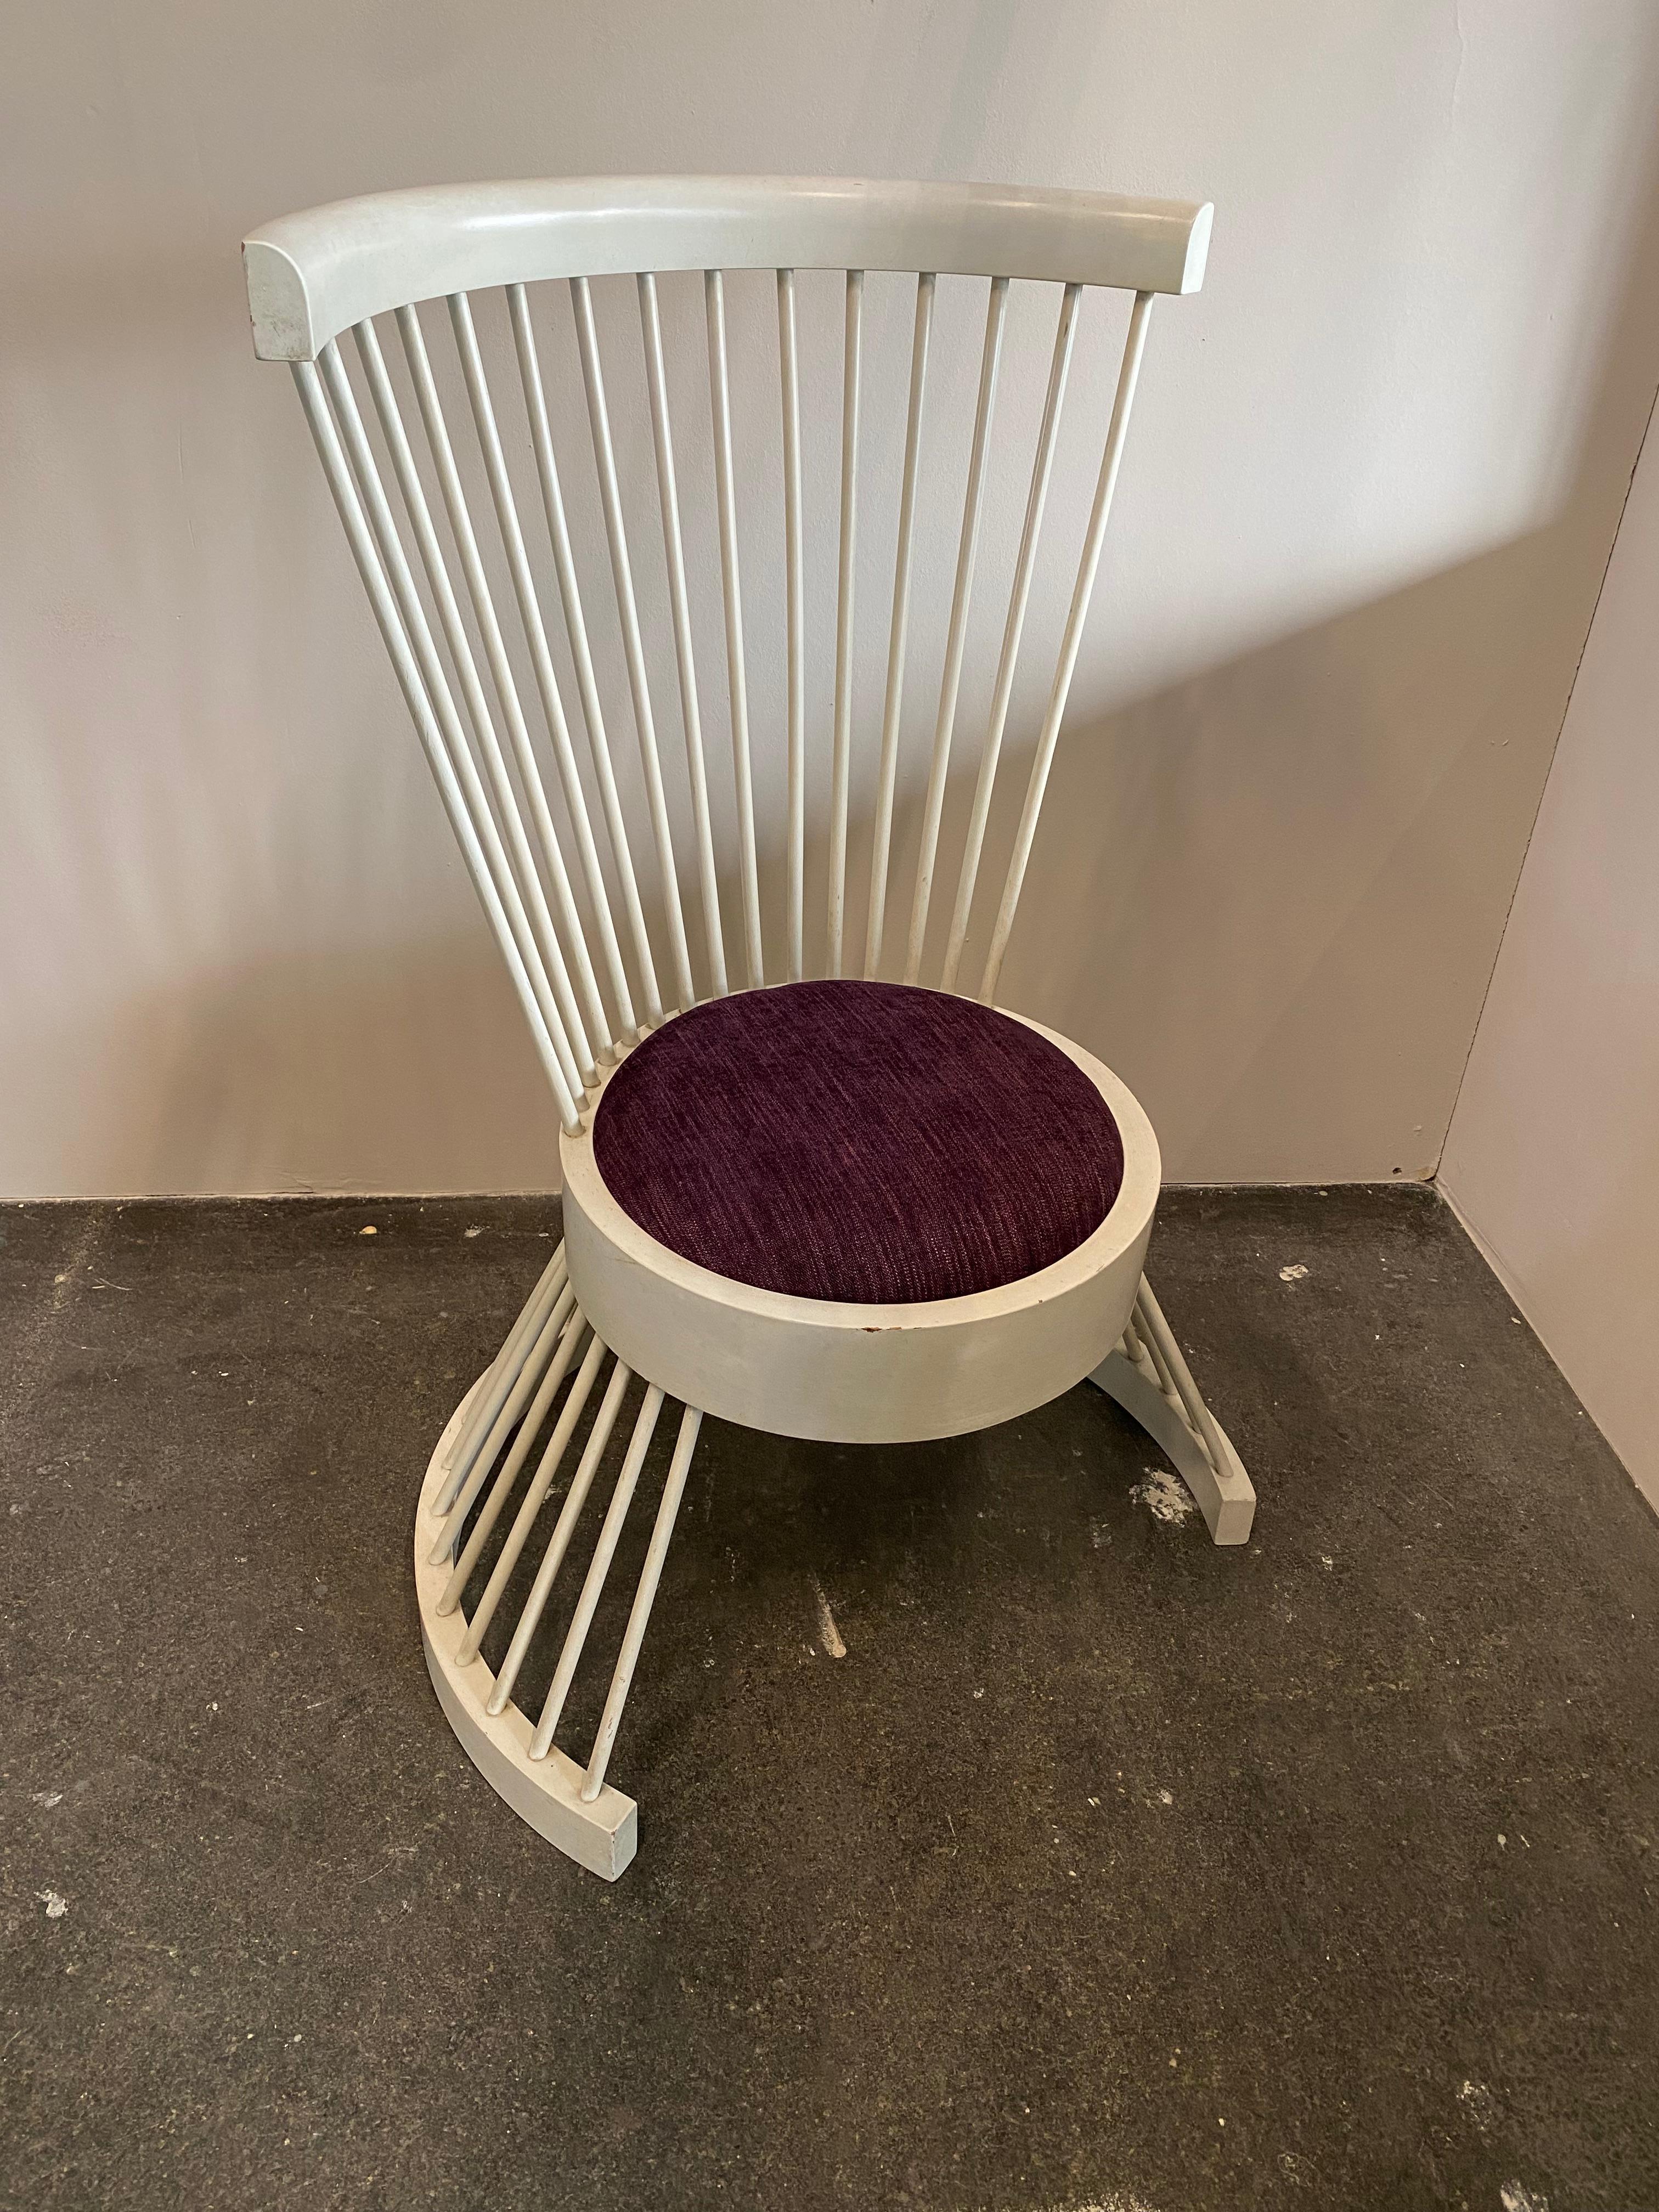 This chair by Horst Romanus Wanke is a really special and rare piece. The high backrest makes the chair almost a throne. Horst Romanus Wanke not only uses the many wooden sticks for the backrest but also for the feet. This makes the chair look like